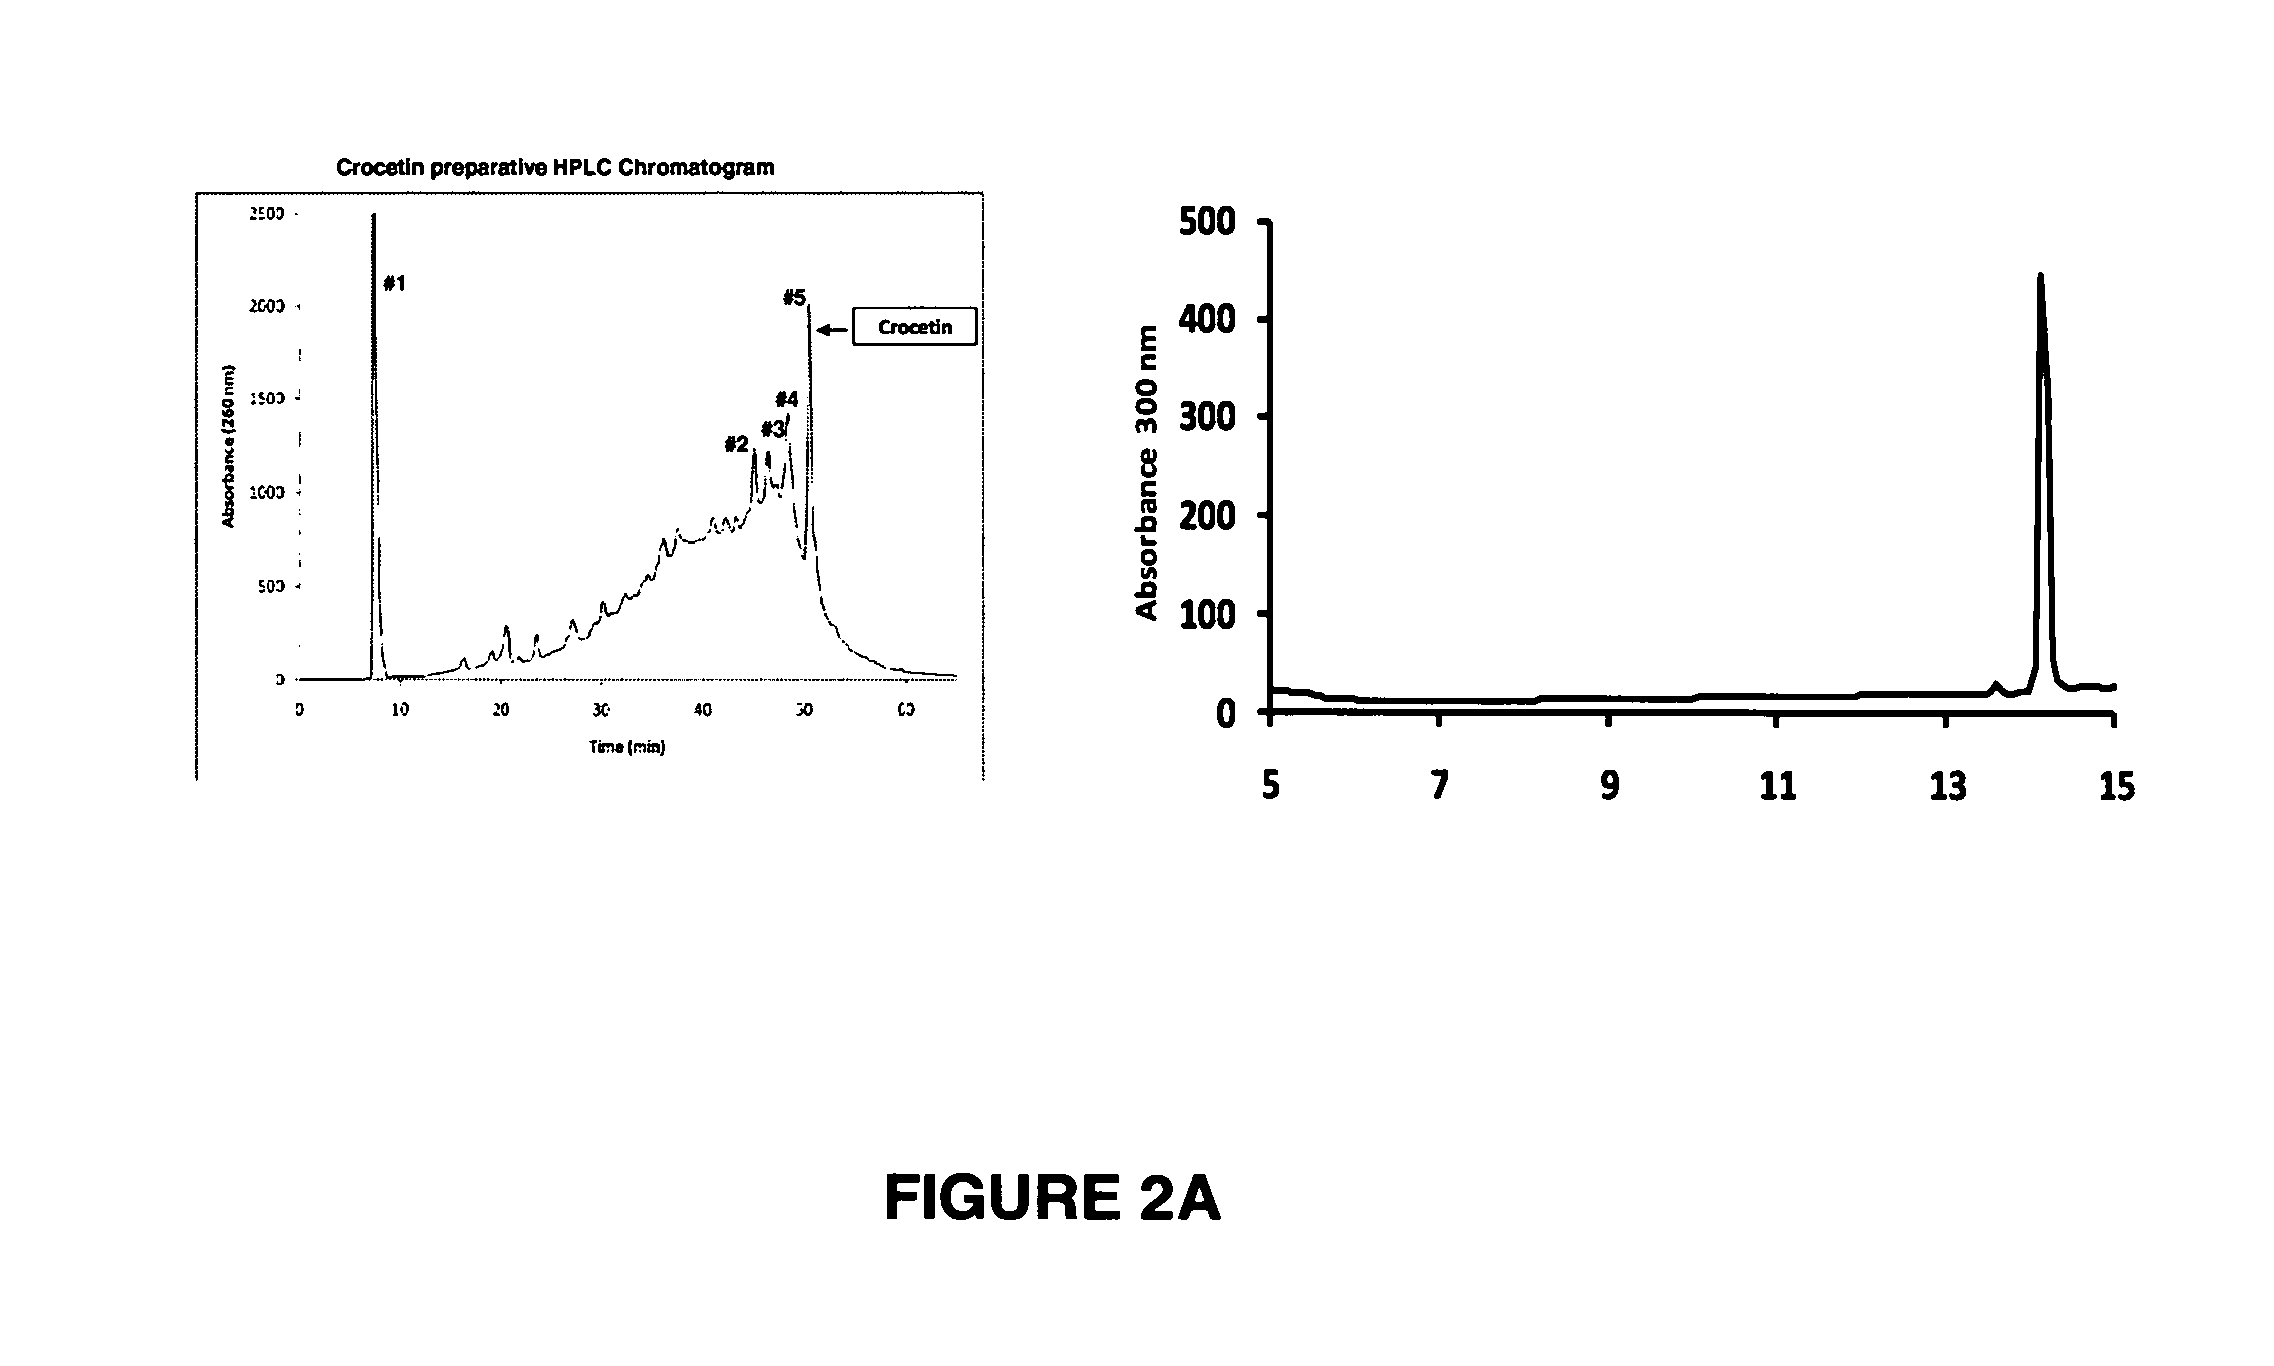 Purified Crocetin Compound And Method For Treating, Inhibiting, And/Or Prophylaxis of Cancer, Such As Pancreatic Cancer